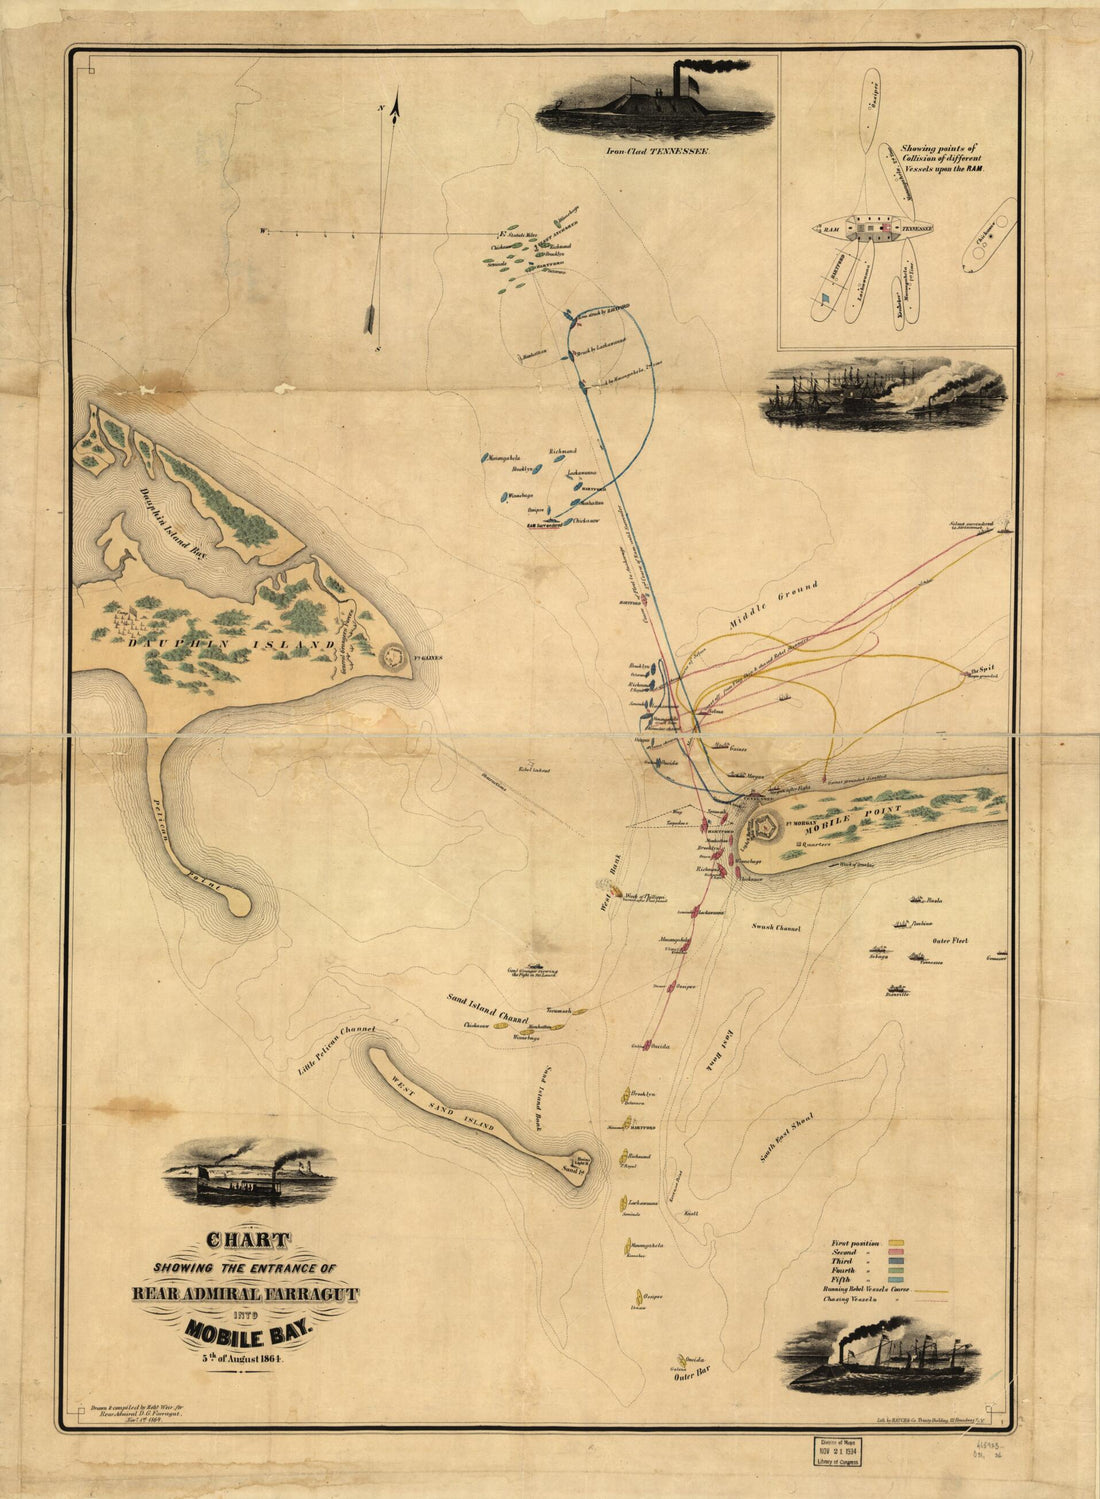 This old map of Chart Showing the Entrance of Rear Admiral Farragut Into Mobile Bay. 5th of August from 1864 was created by David Glasgow Farragut, Robert Weir in 1864